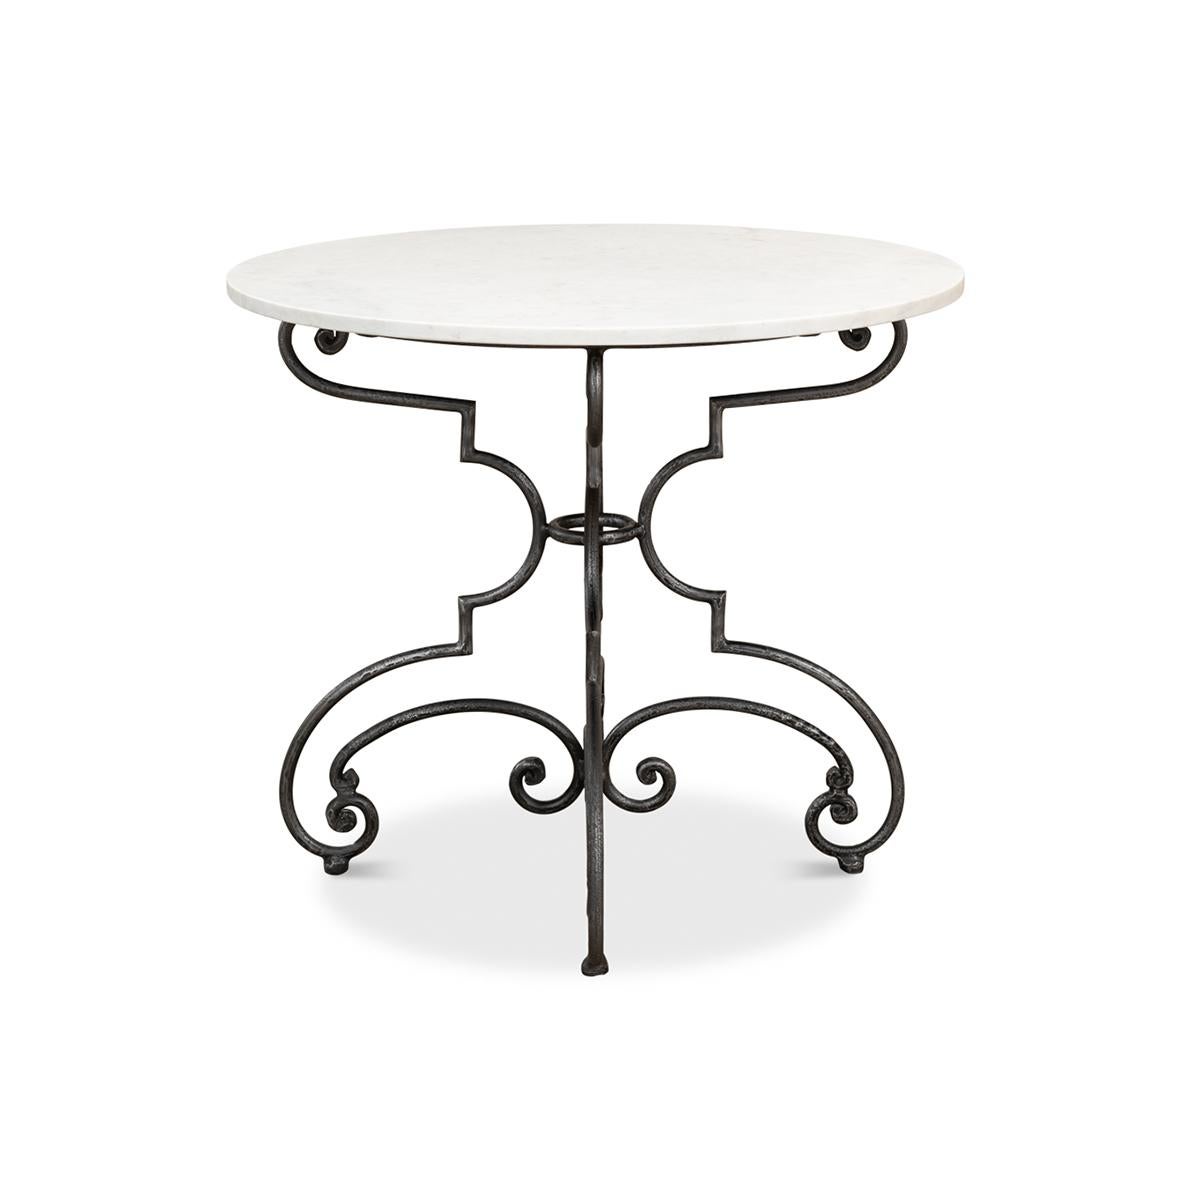 French country-style round table with a classic white marble top on a hand-forged iron base.

Dimensions: 32